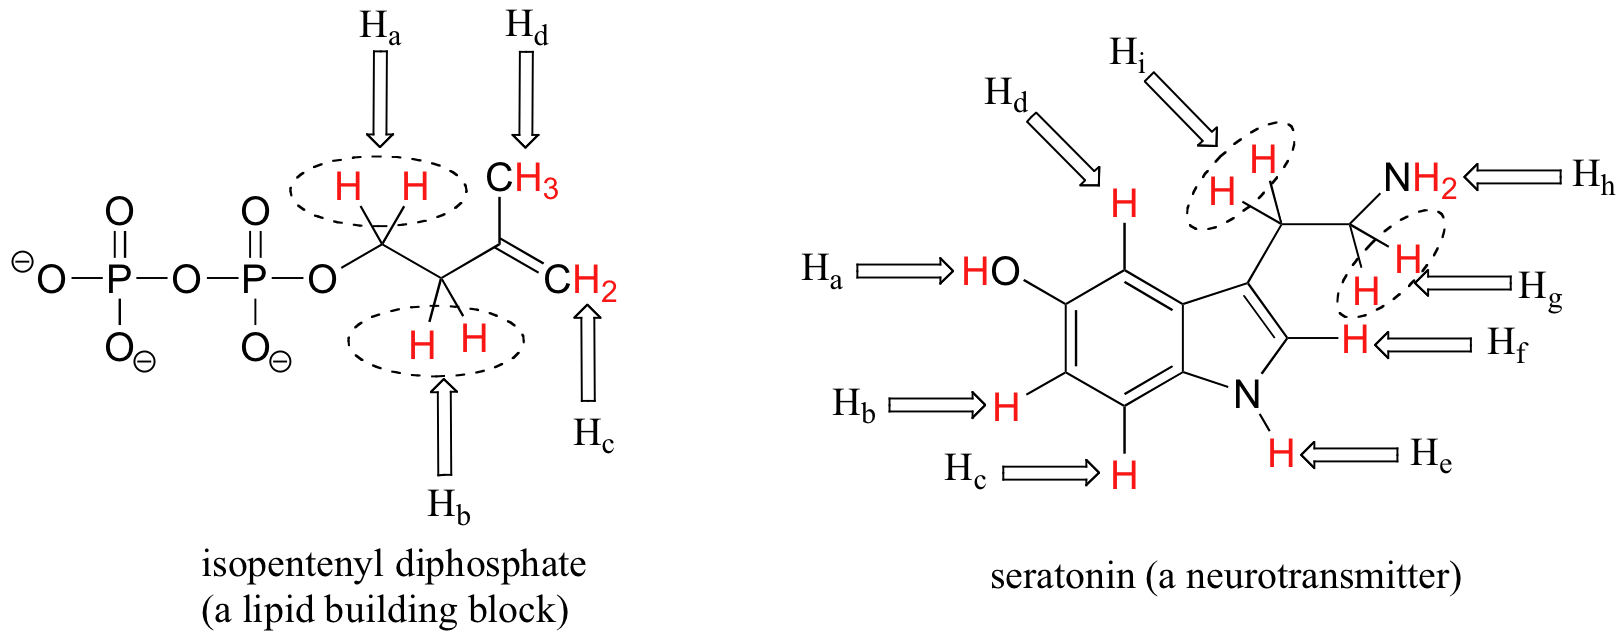 Molecular structures showing equivalent protons in isopentyl diphosphate (Ha, Hb, Hc, Hd) and seratonin (Ha, Hb, Hc, Hd, He, Hf, Hg, Hh, Hi).